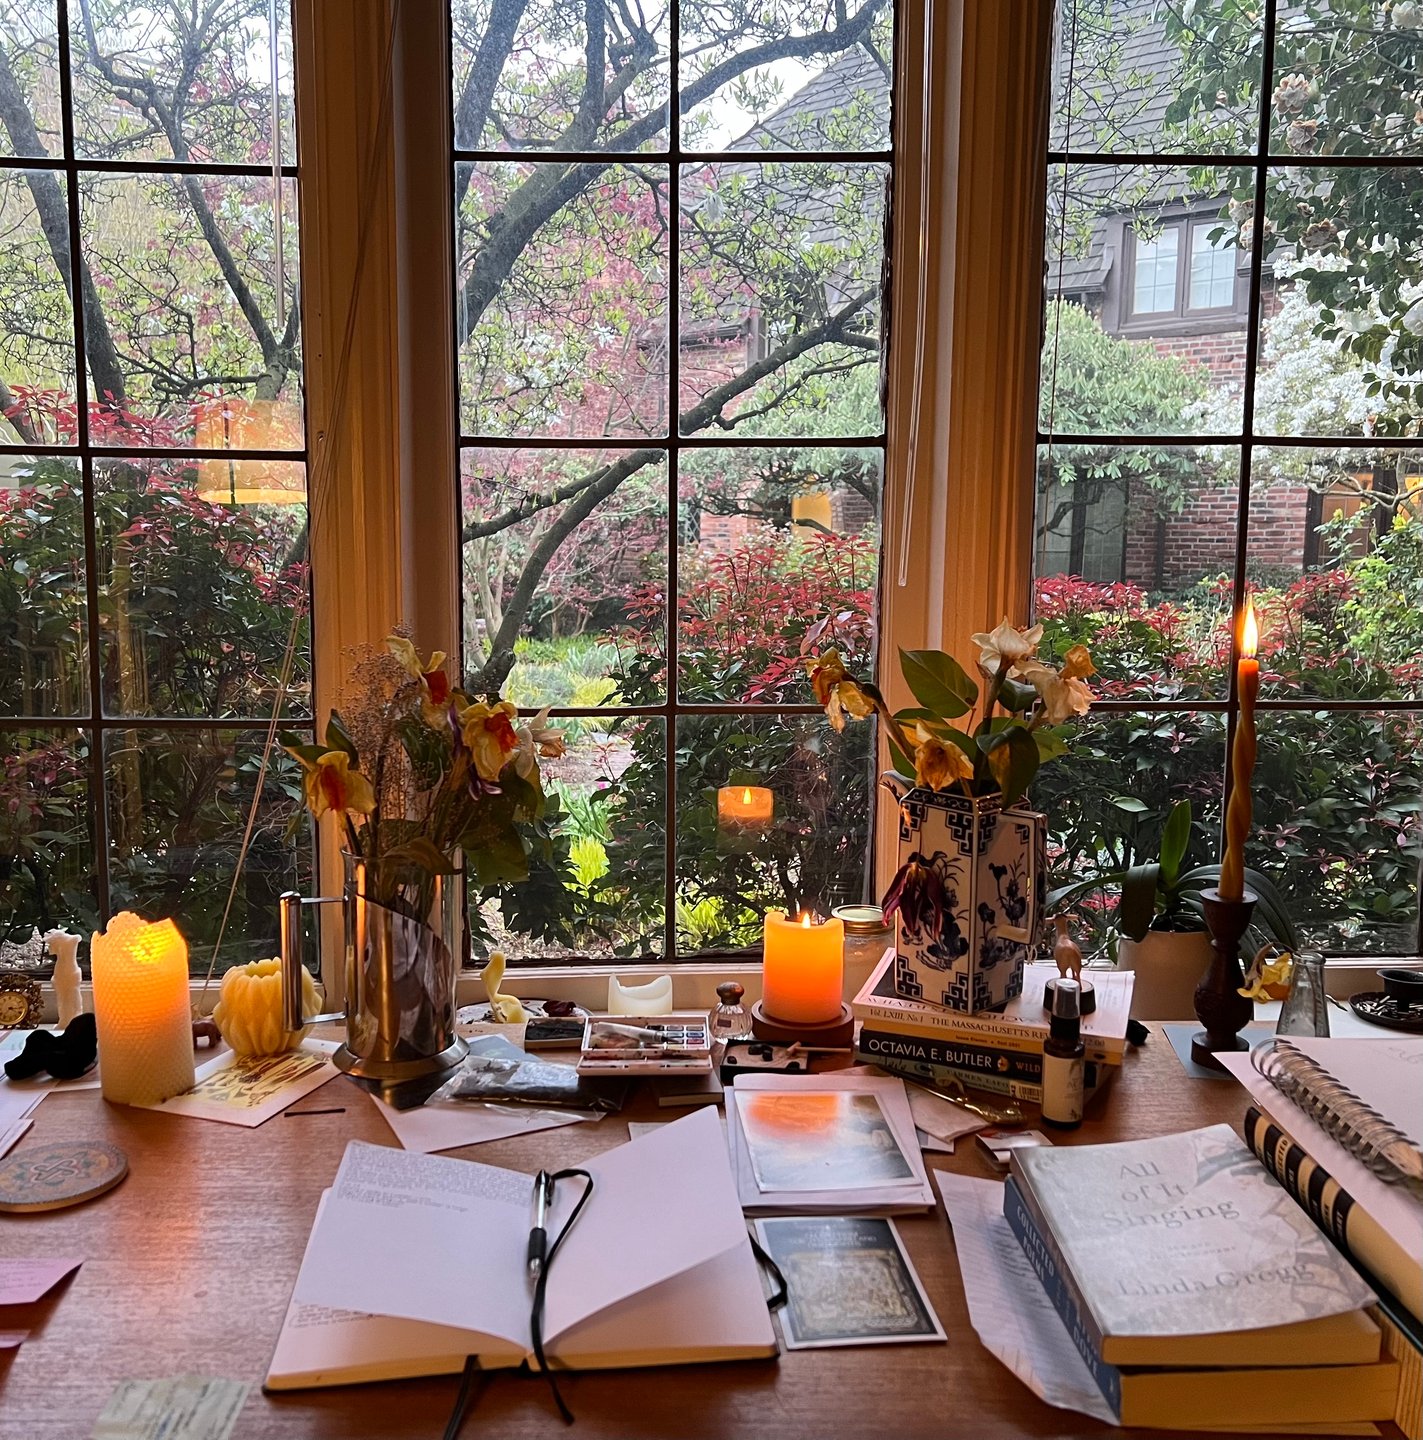 This is a photo of Bates' desk at dusk. The desk is covered in notebooks, postcards, and lit candles. A warm light comes from the candles and outside there are green trees and bushes.